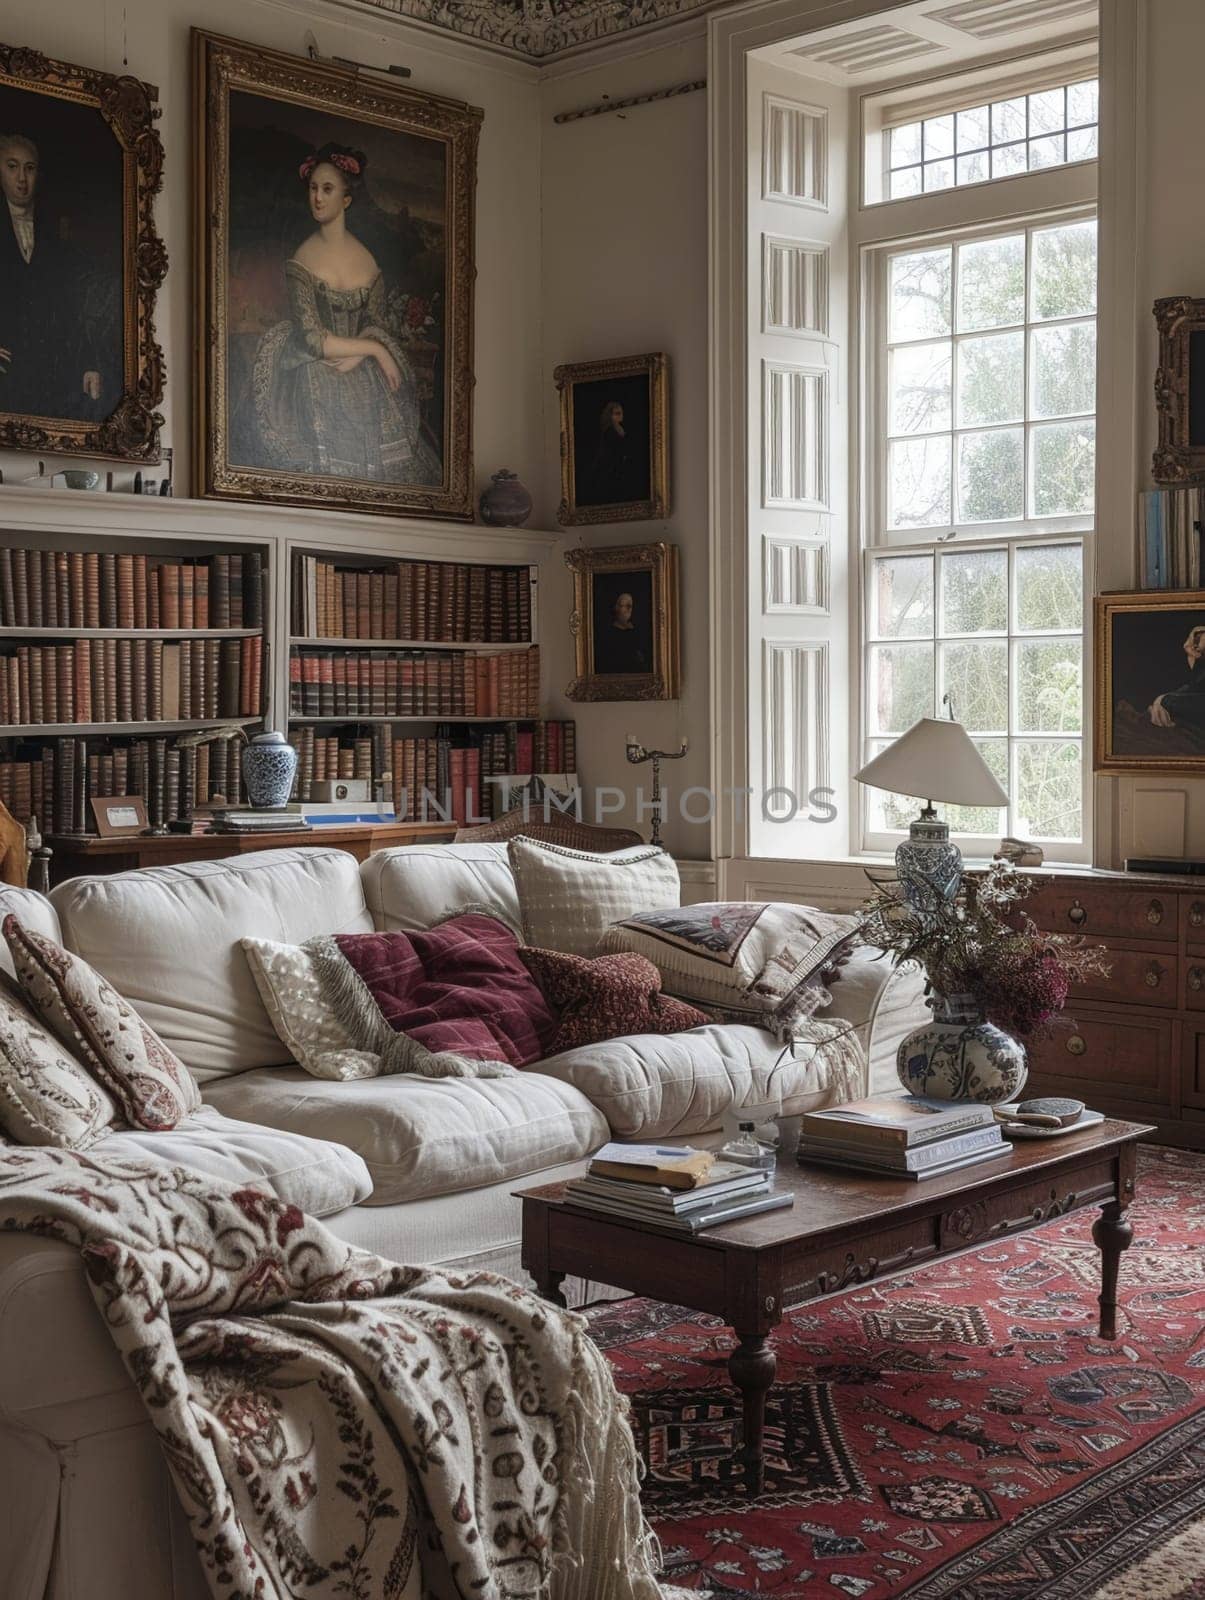 Regency-style drawing room with period furniture and portrait paintings.